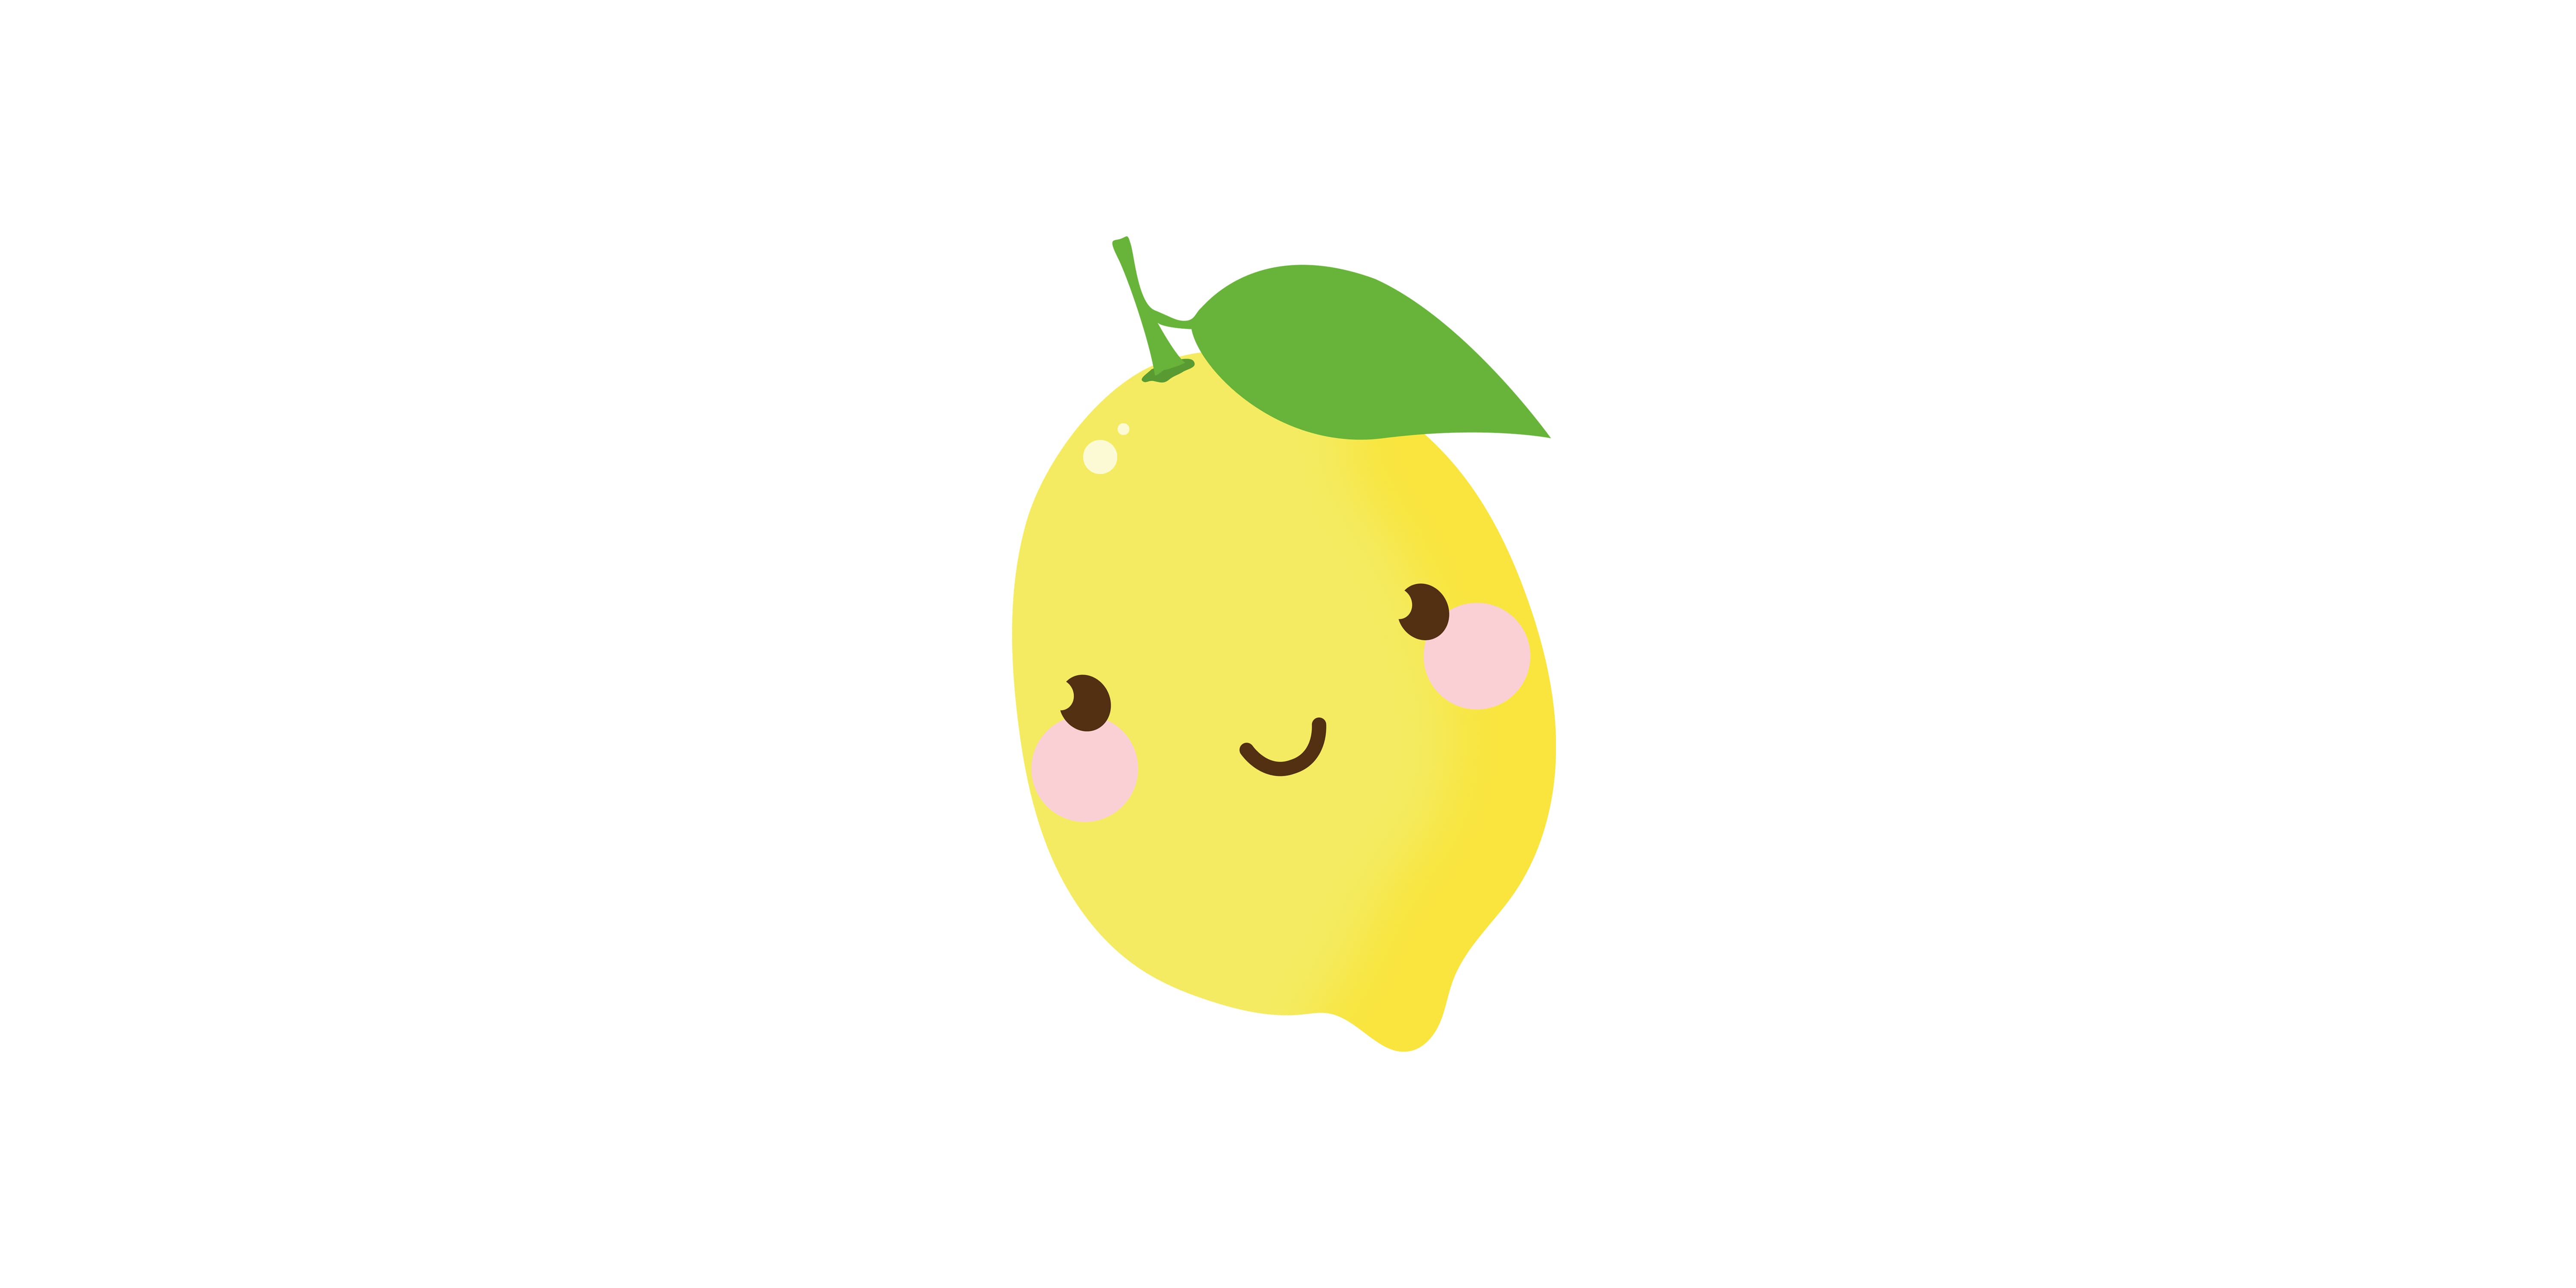 Your baby is now about the size of a lemon